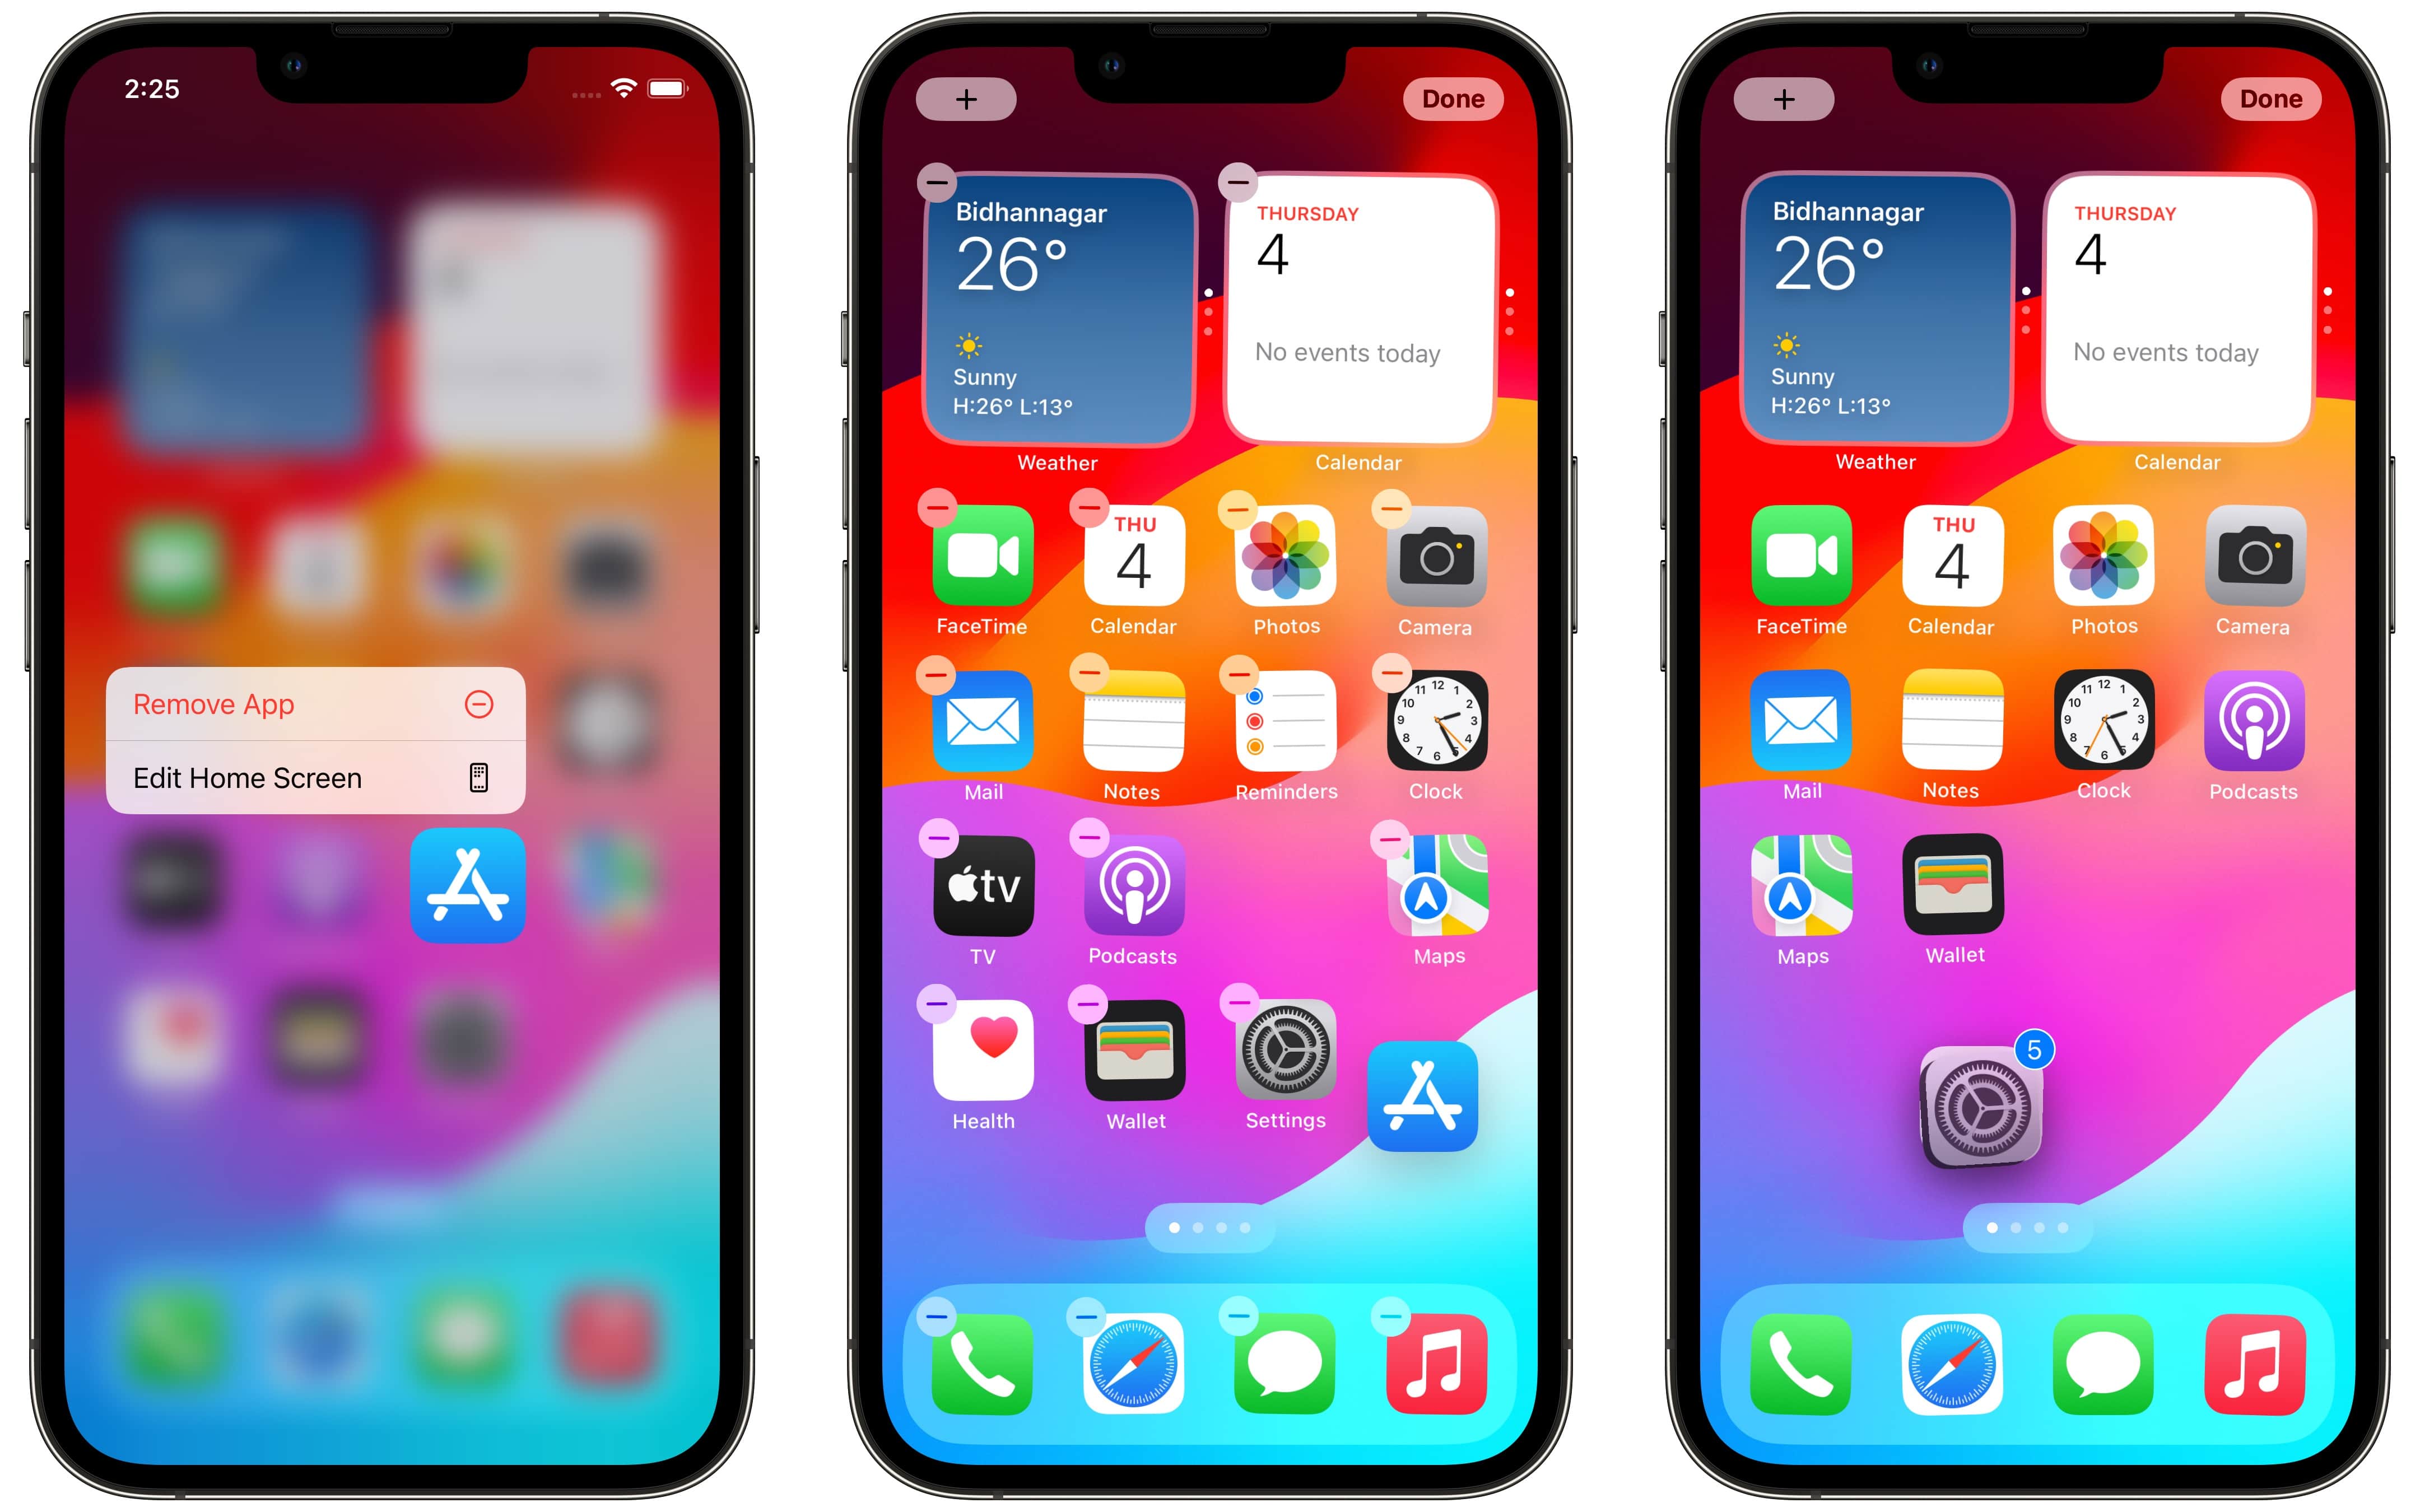 Moving apps around on iPhone's Home Screen